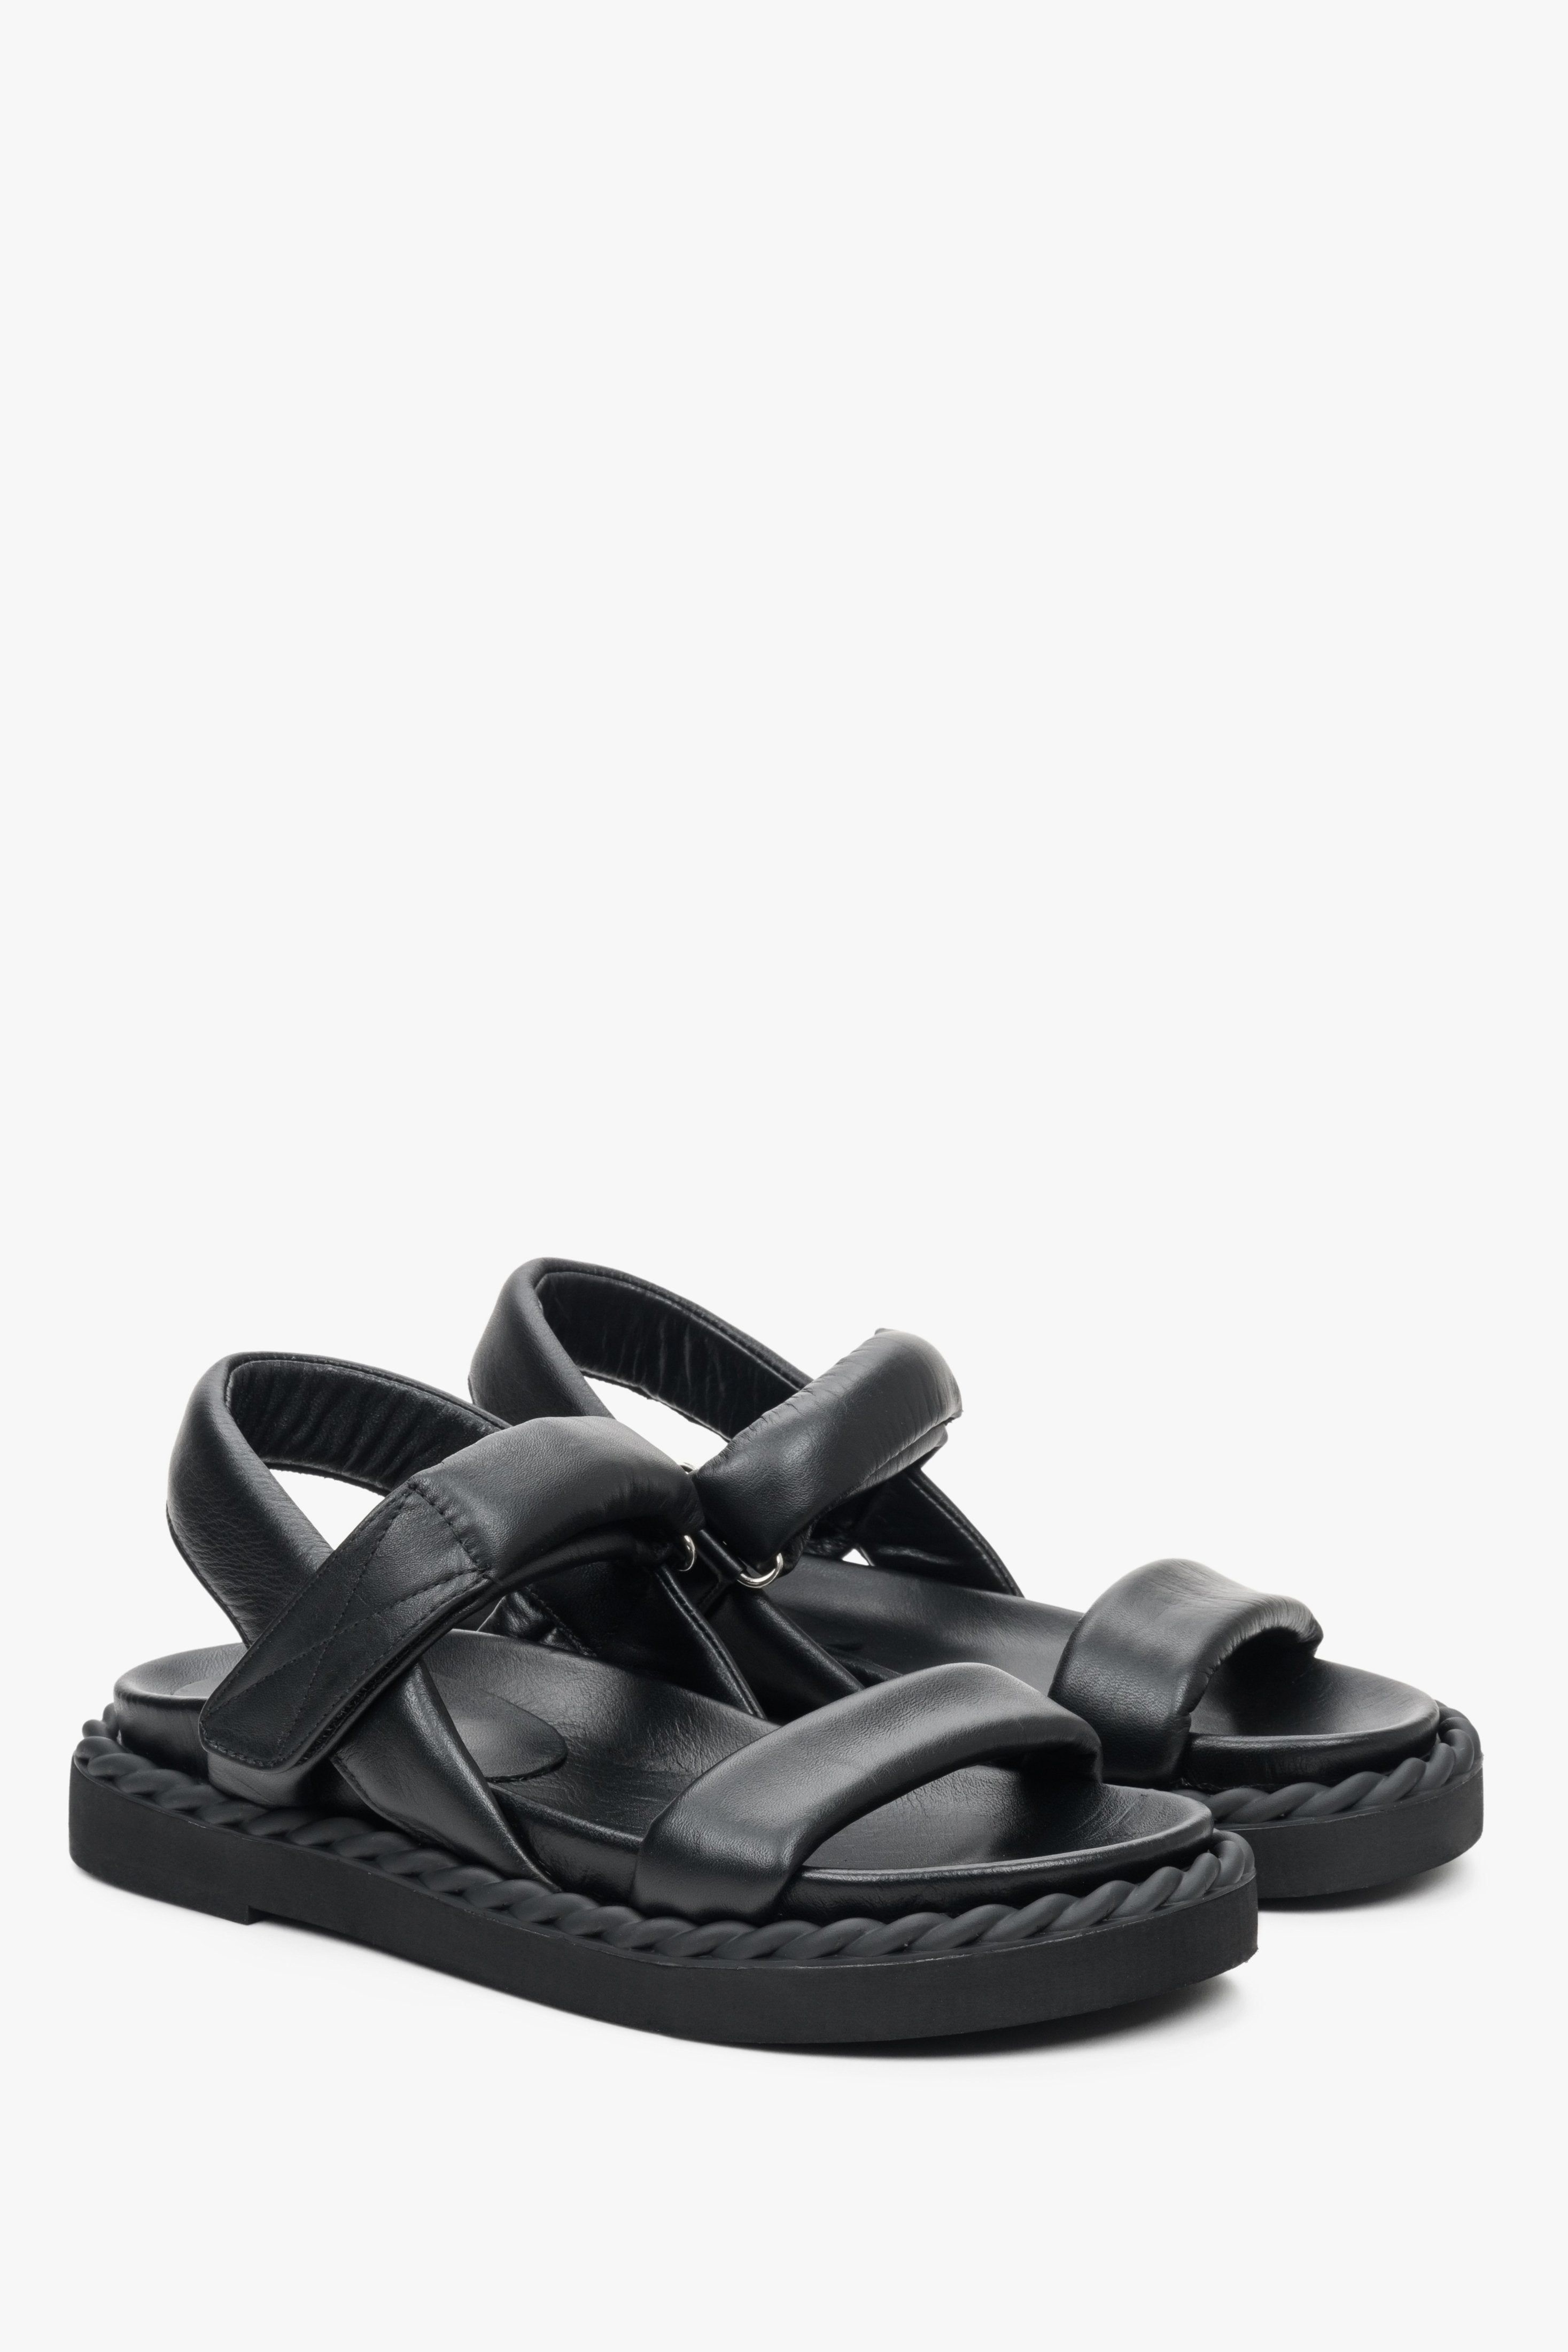 Women's sandals for summer in black colour made of natural leather on a comfortable sole.